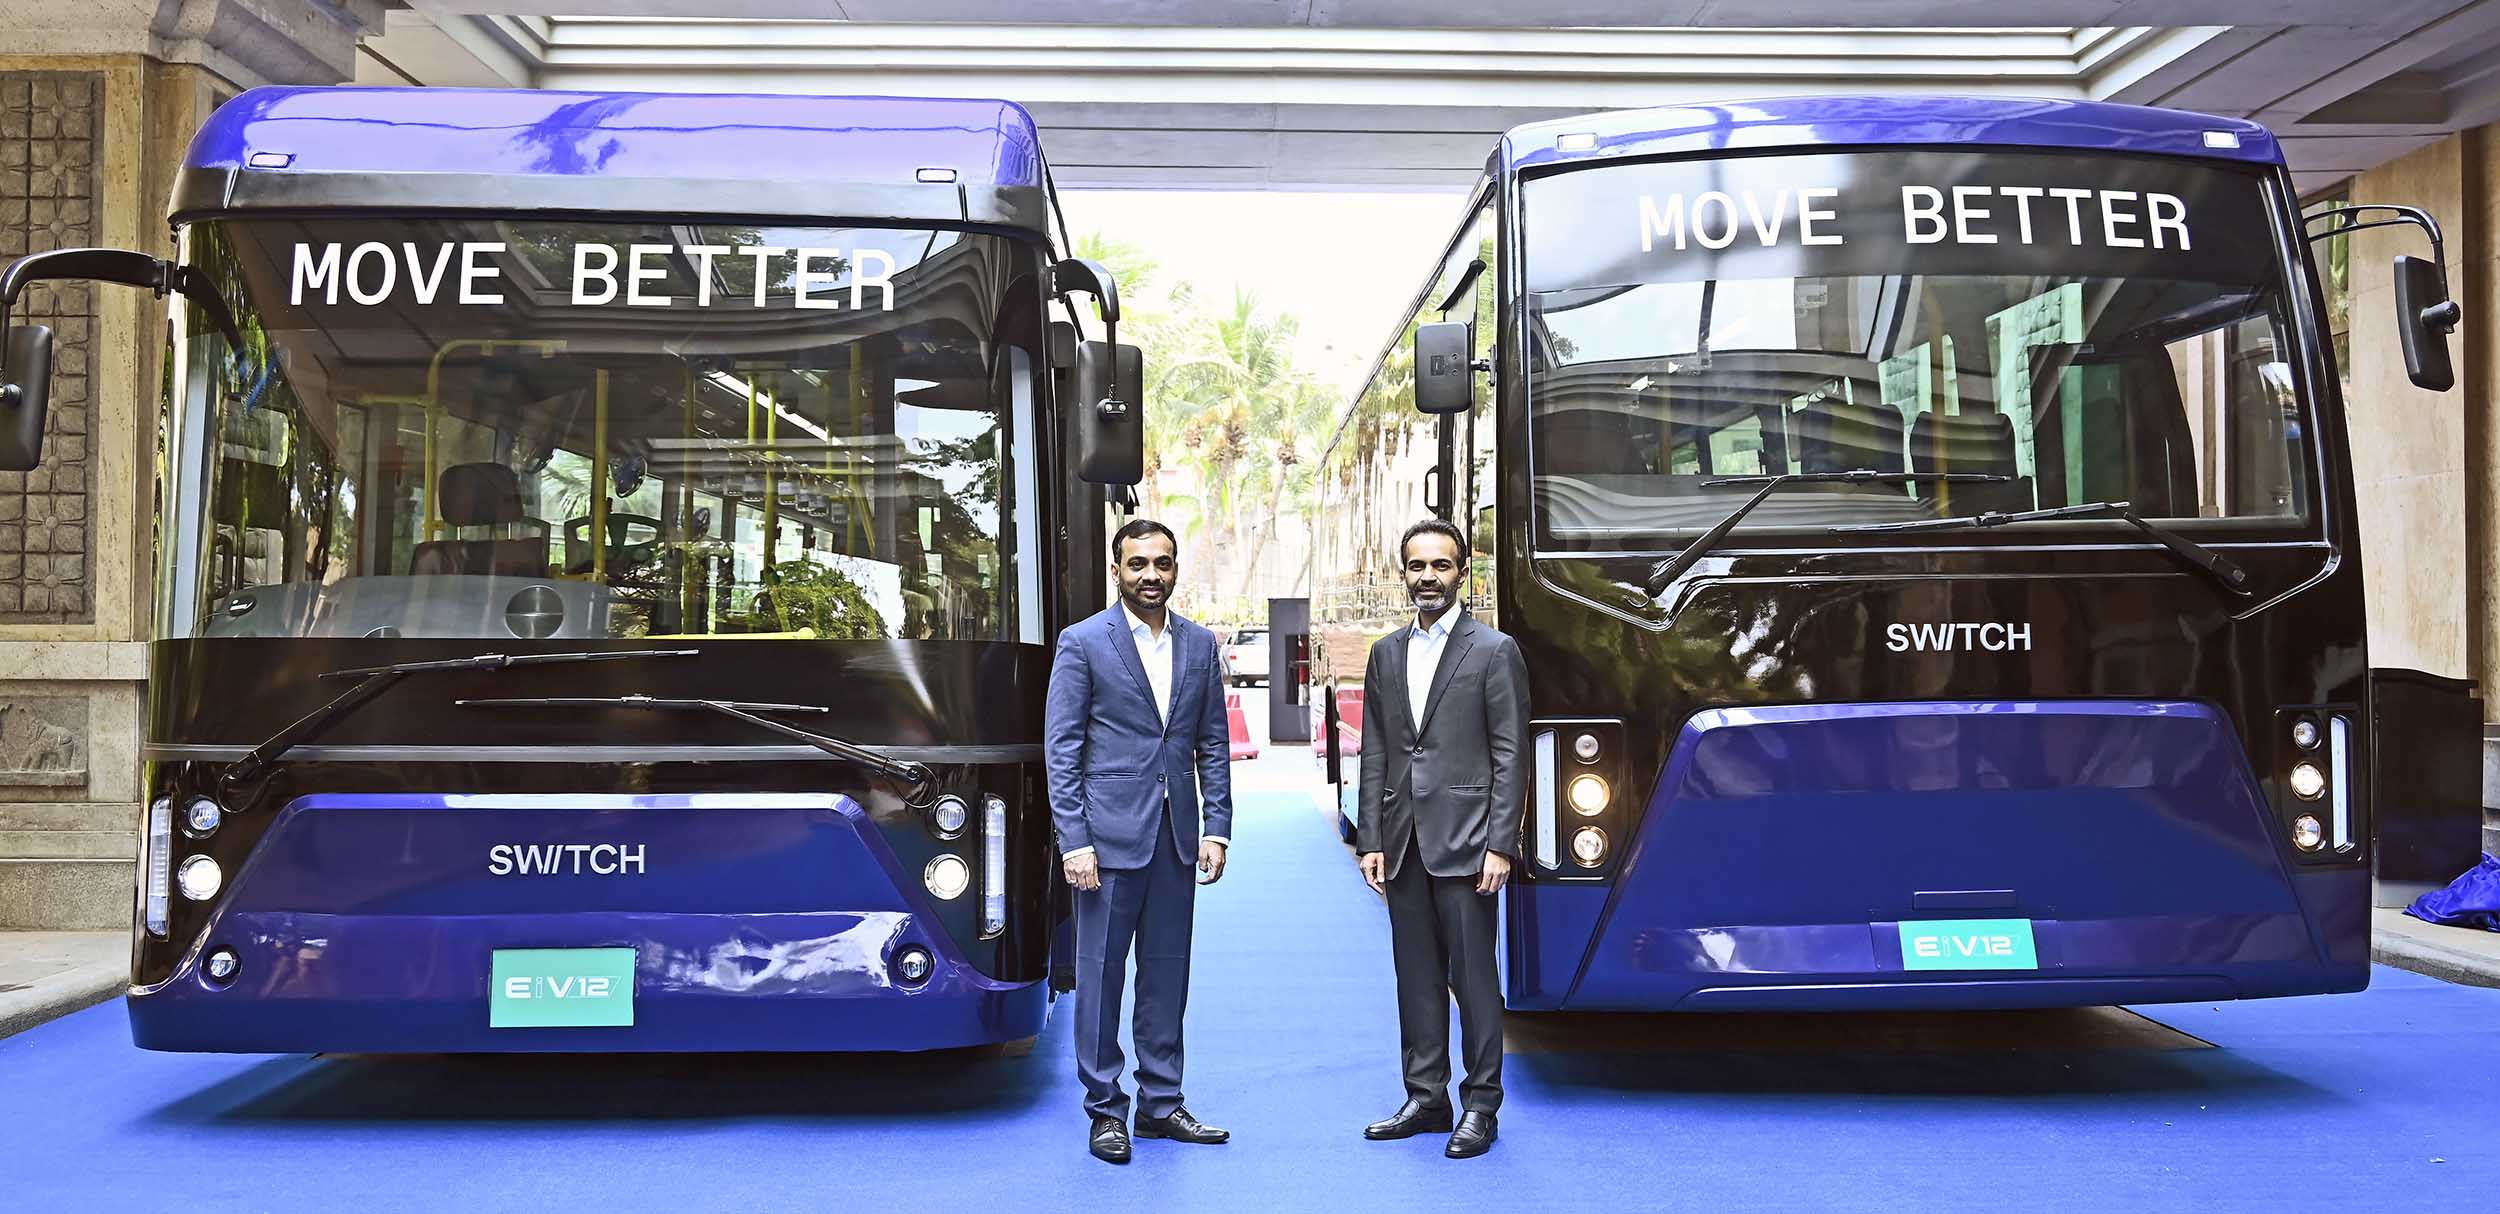 The company is launching the first state-of-the-art electric bus with a range of up to 500 km